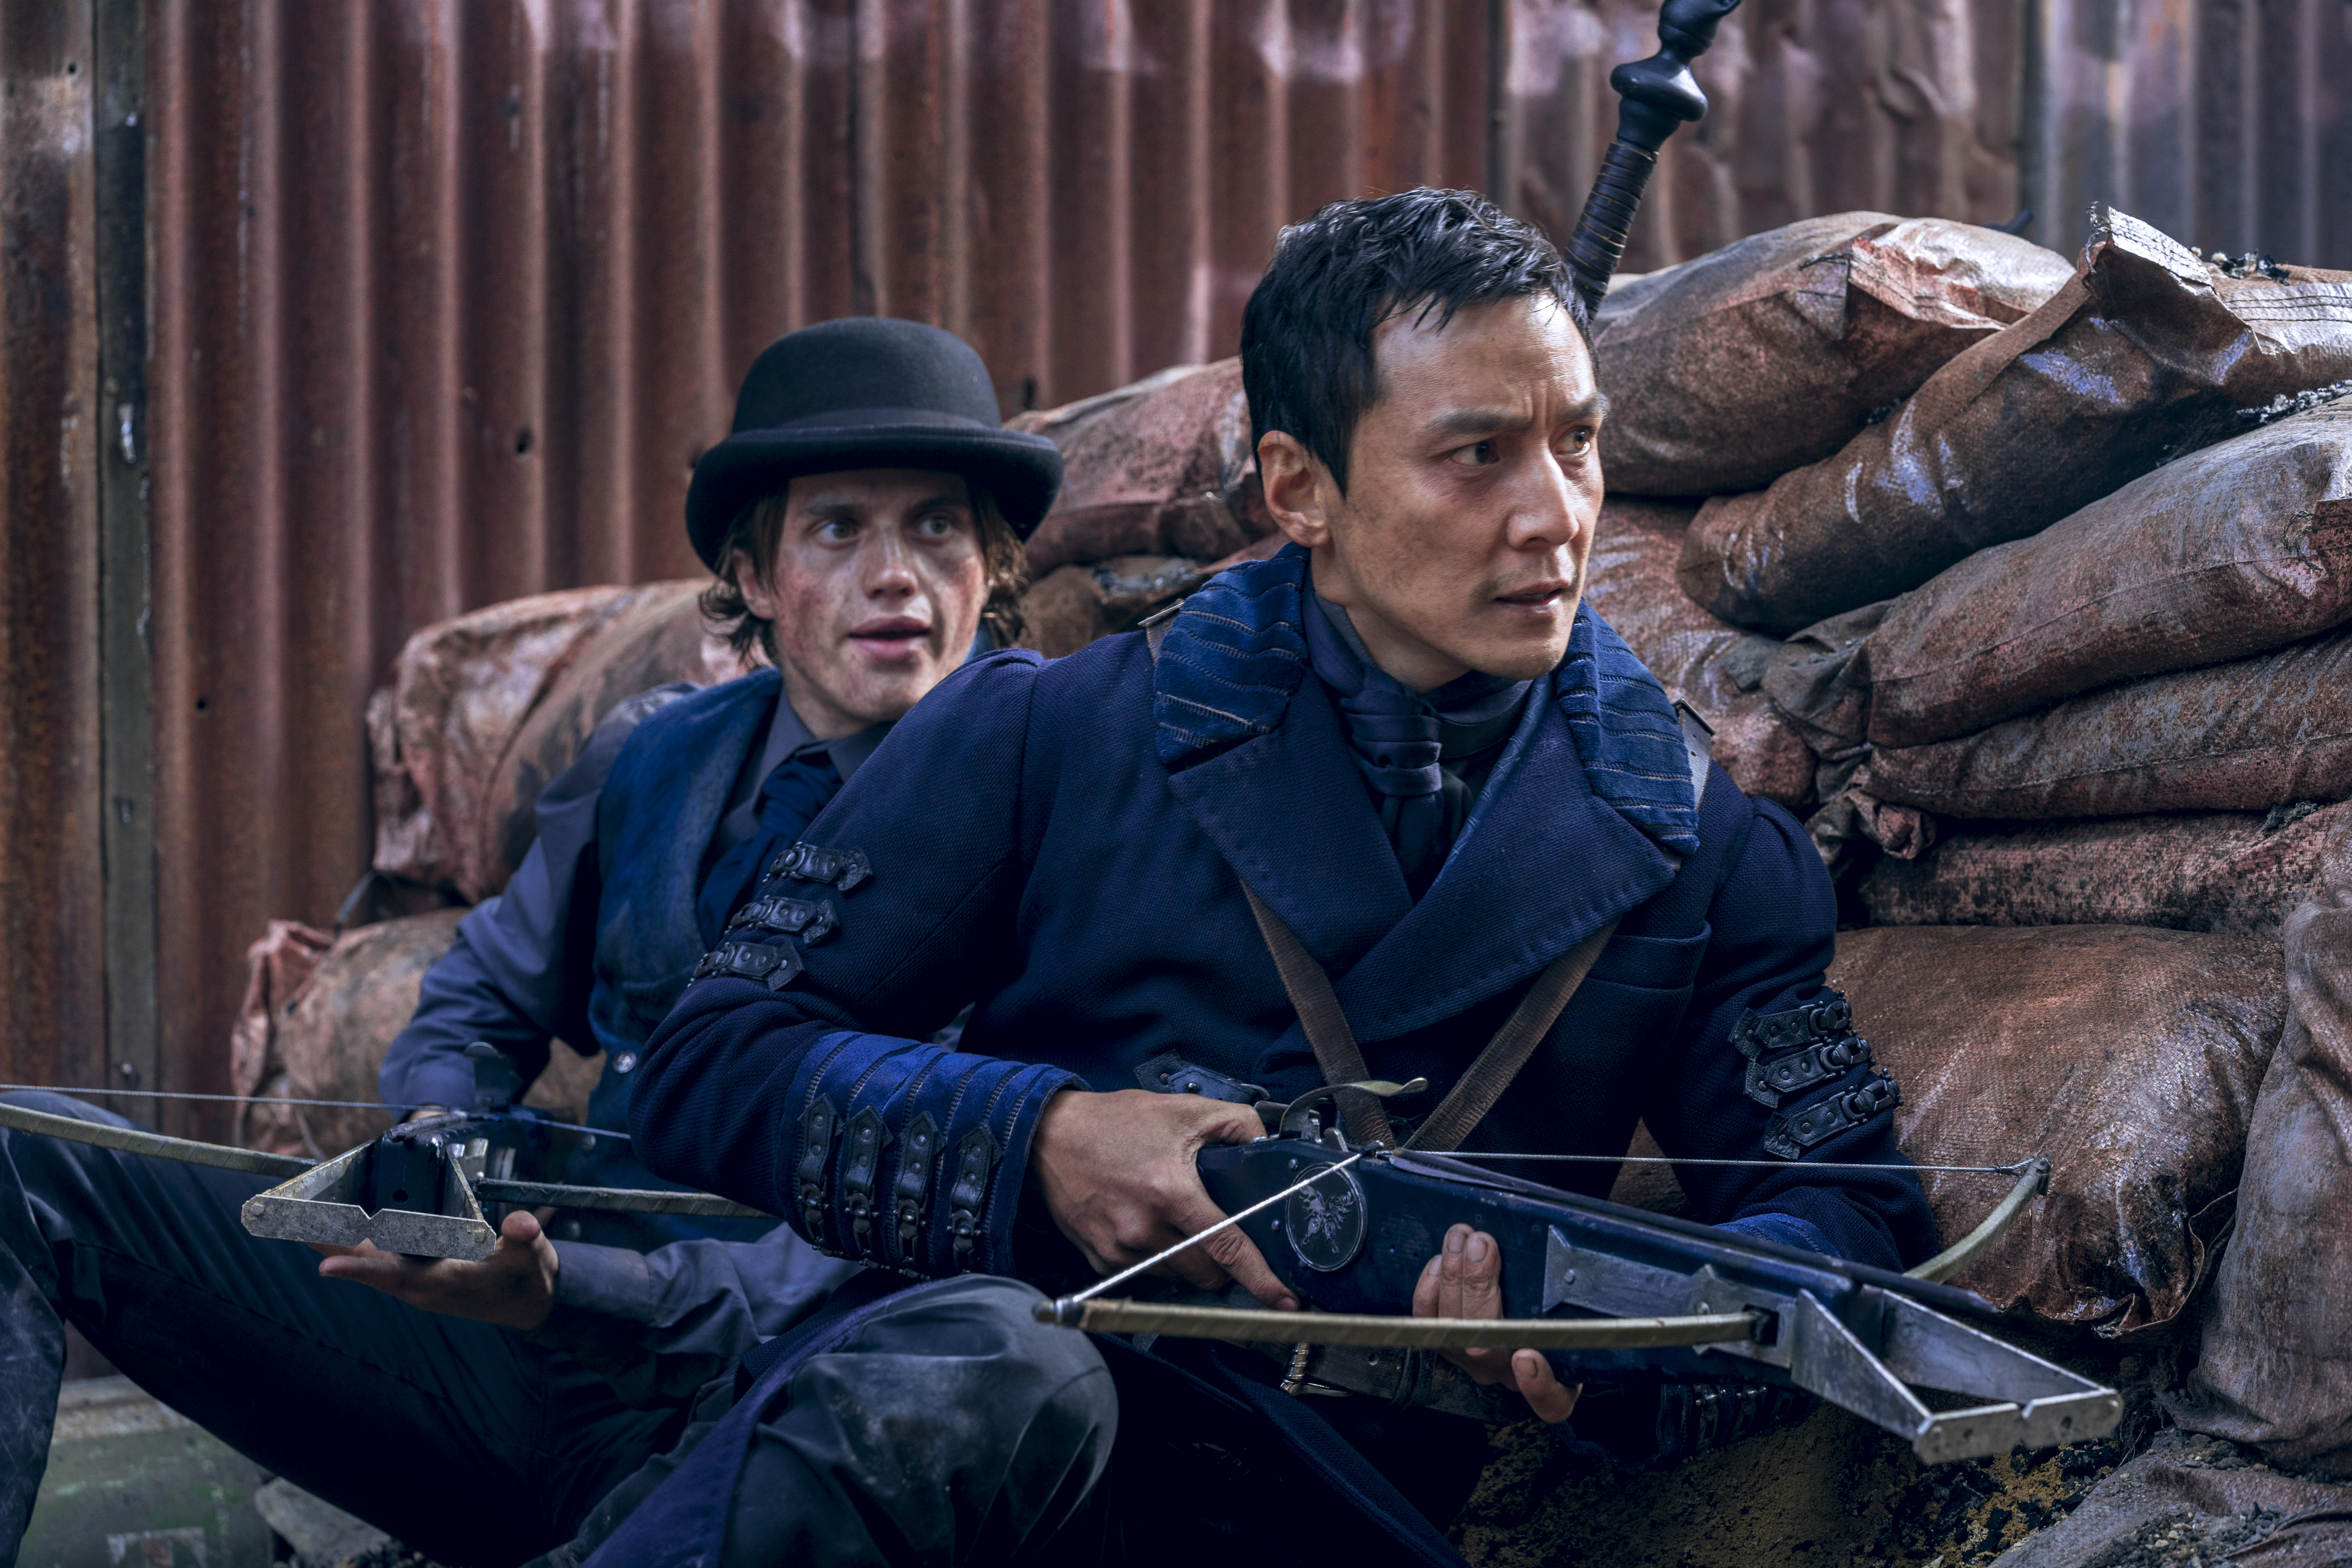 George Sear as Arthur, Daniel Wu as Sunny. They're crouched behind a makeshift barracks. Both are wearing blue velvet overcoats and Arthur is wearing a dark blue or black bowler hat. (Photo Credit: Aidan Monaghan/AMC)